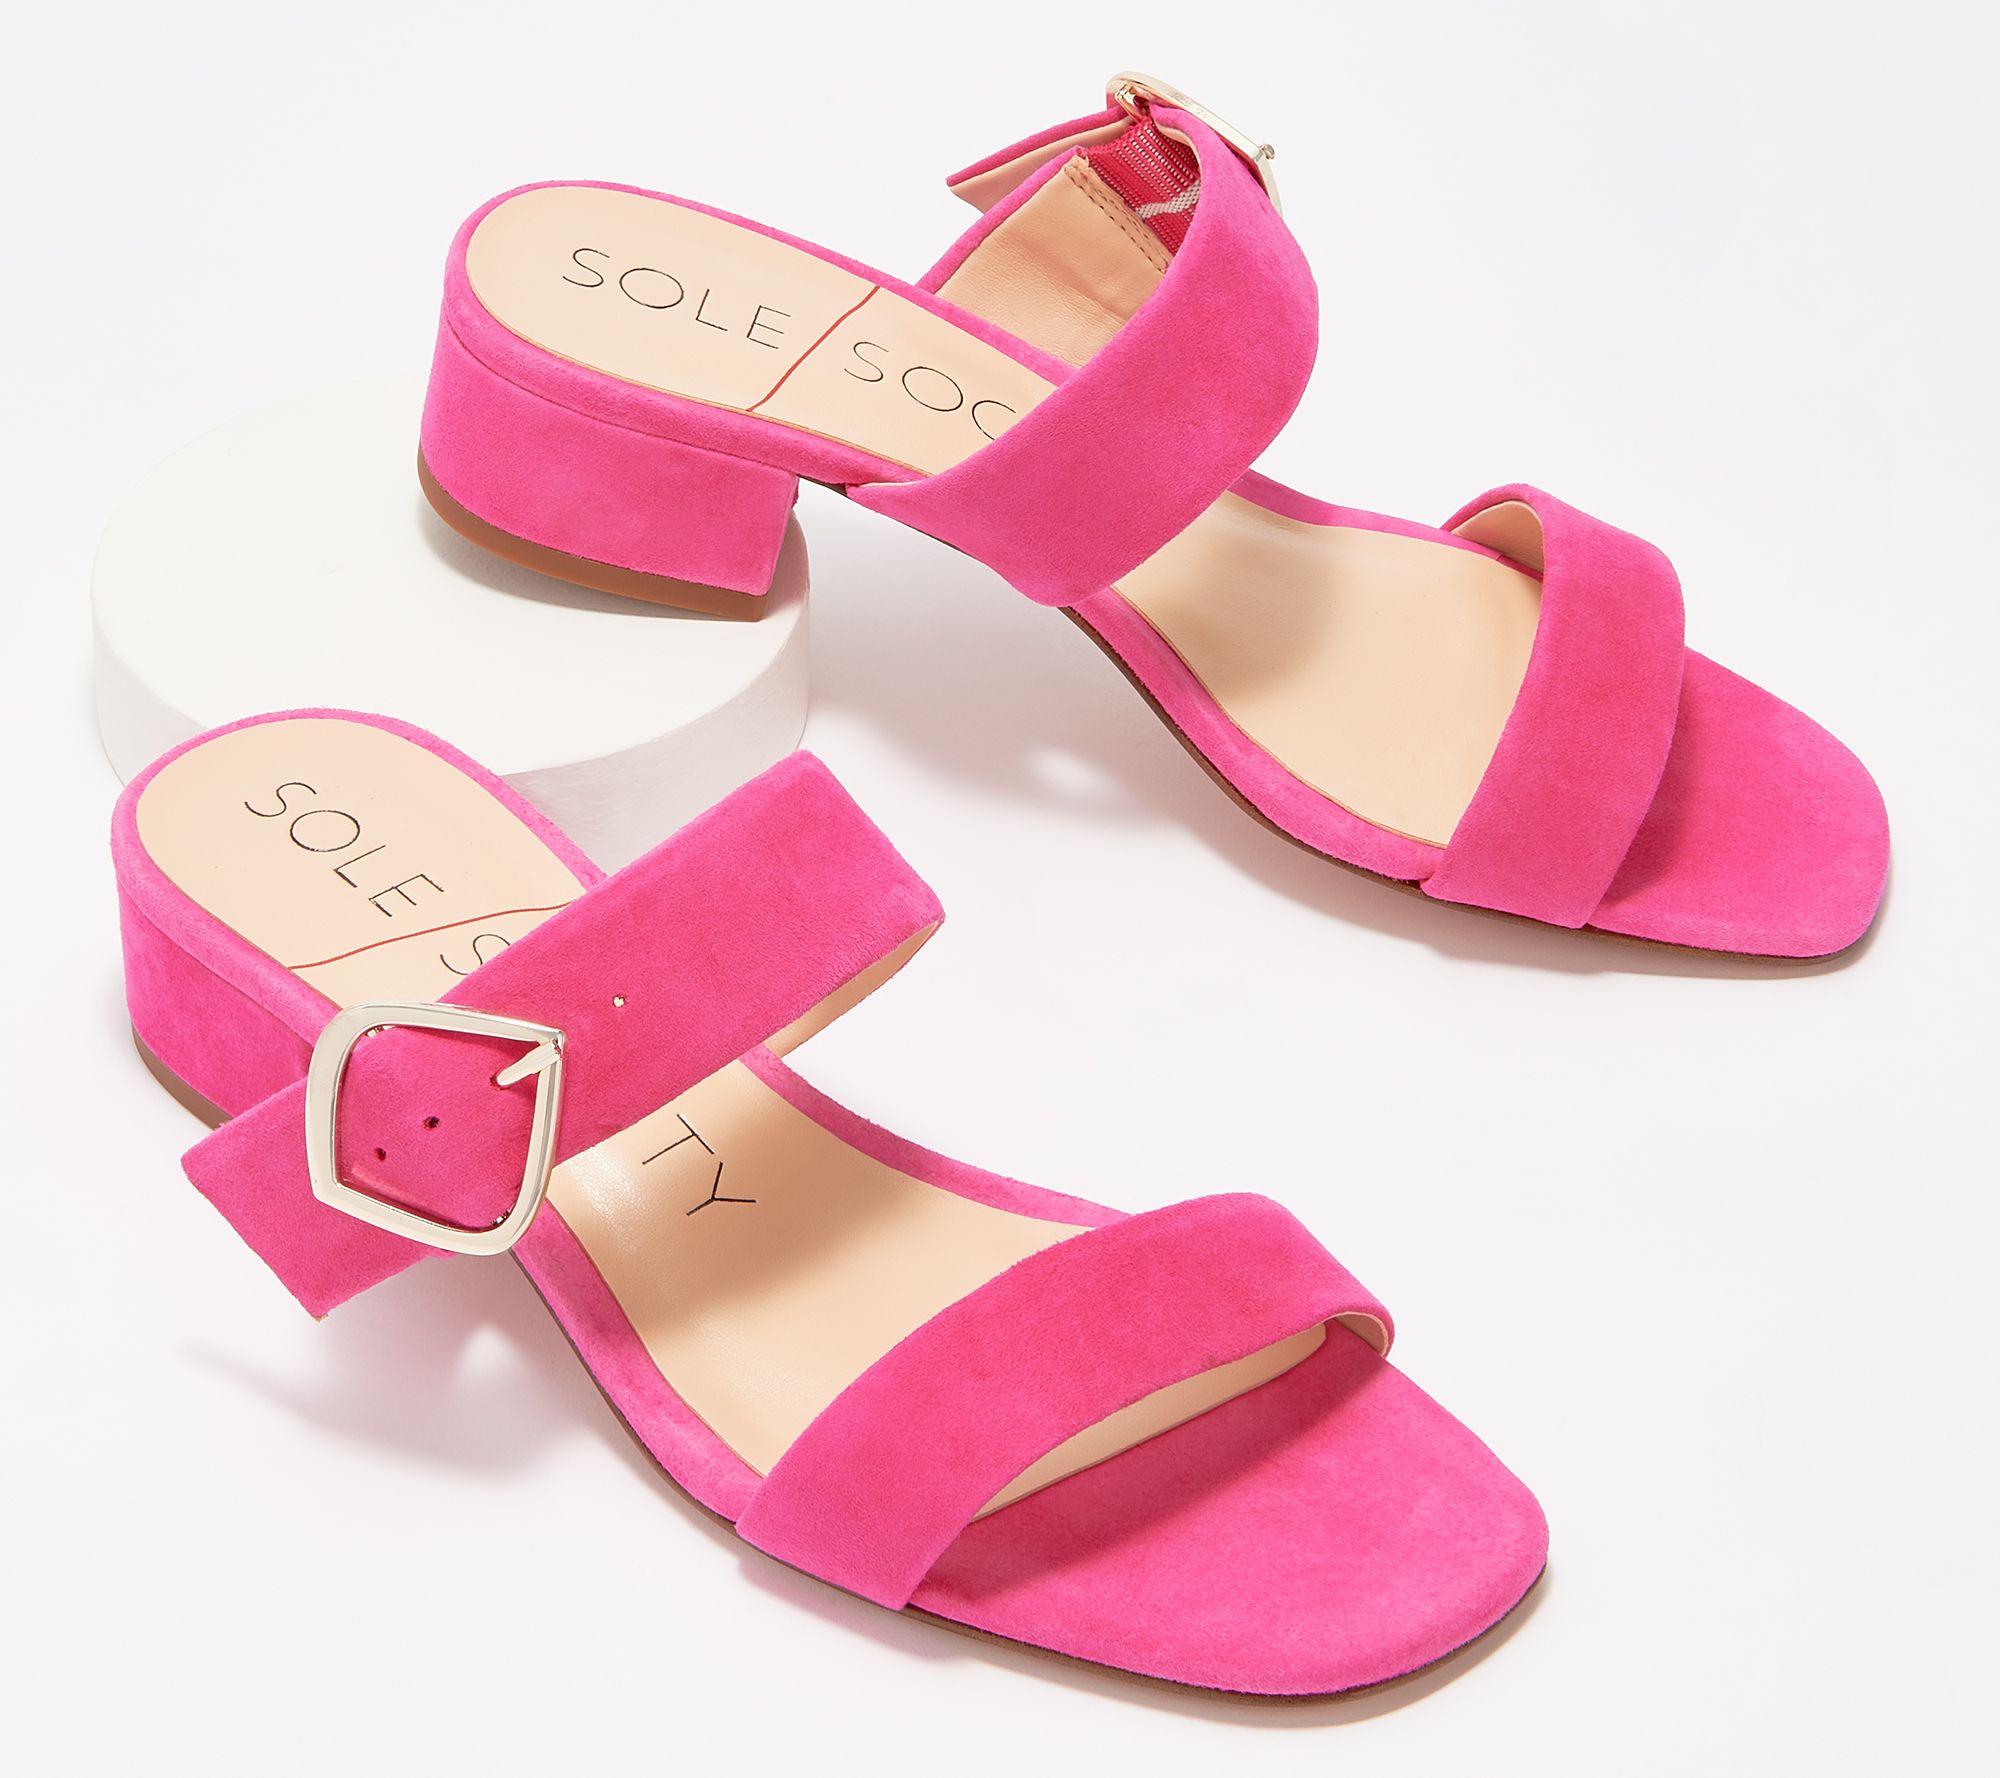 Sole Society Leather Heeled Sandals with Buckle - Emberlise - QVC.com